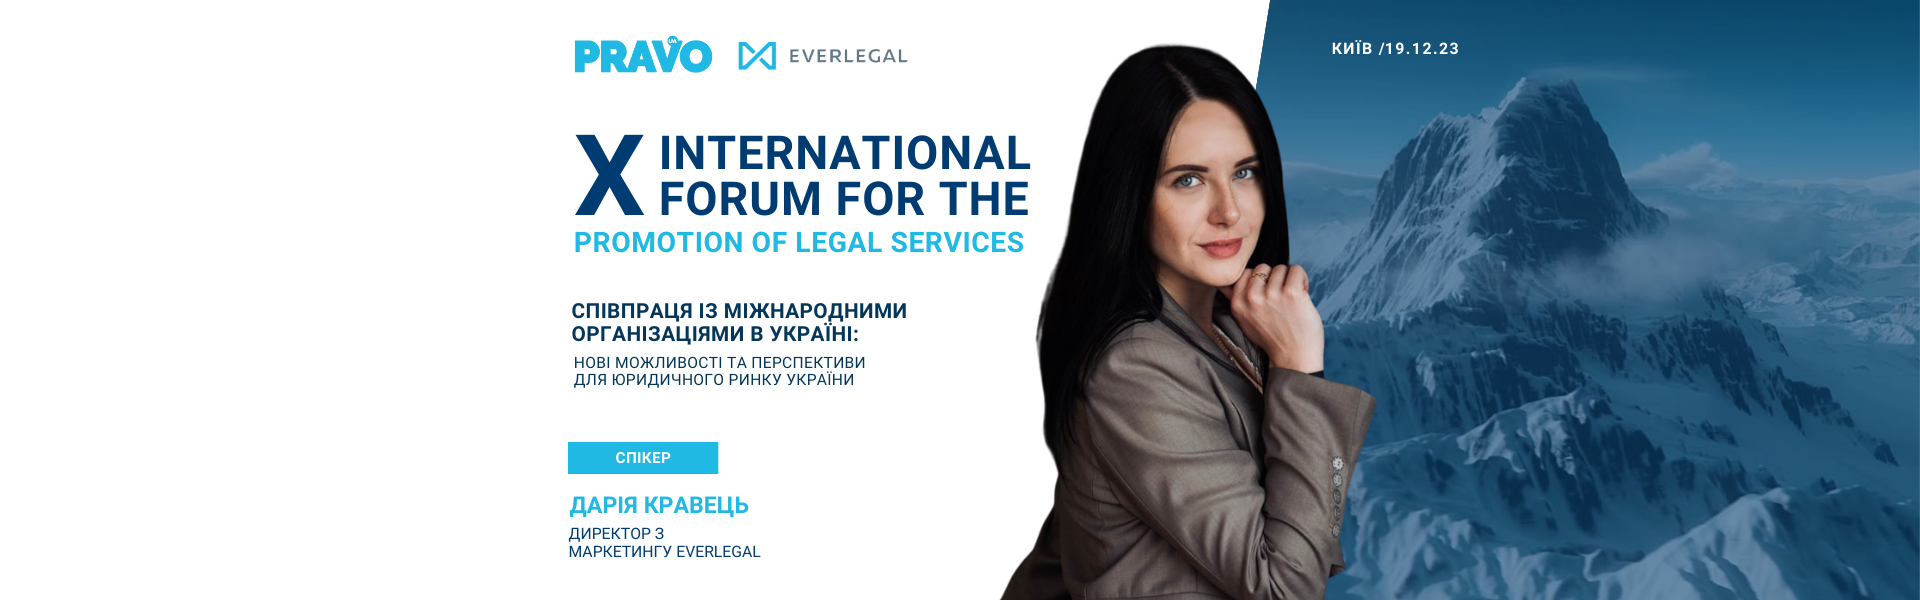 Welcome to the X INTERNATIONAL FORUM FOR THE PROMOTION OF LEGAL SERVICES